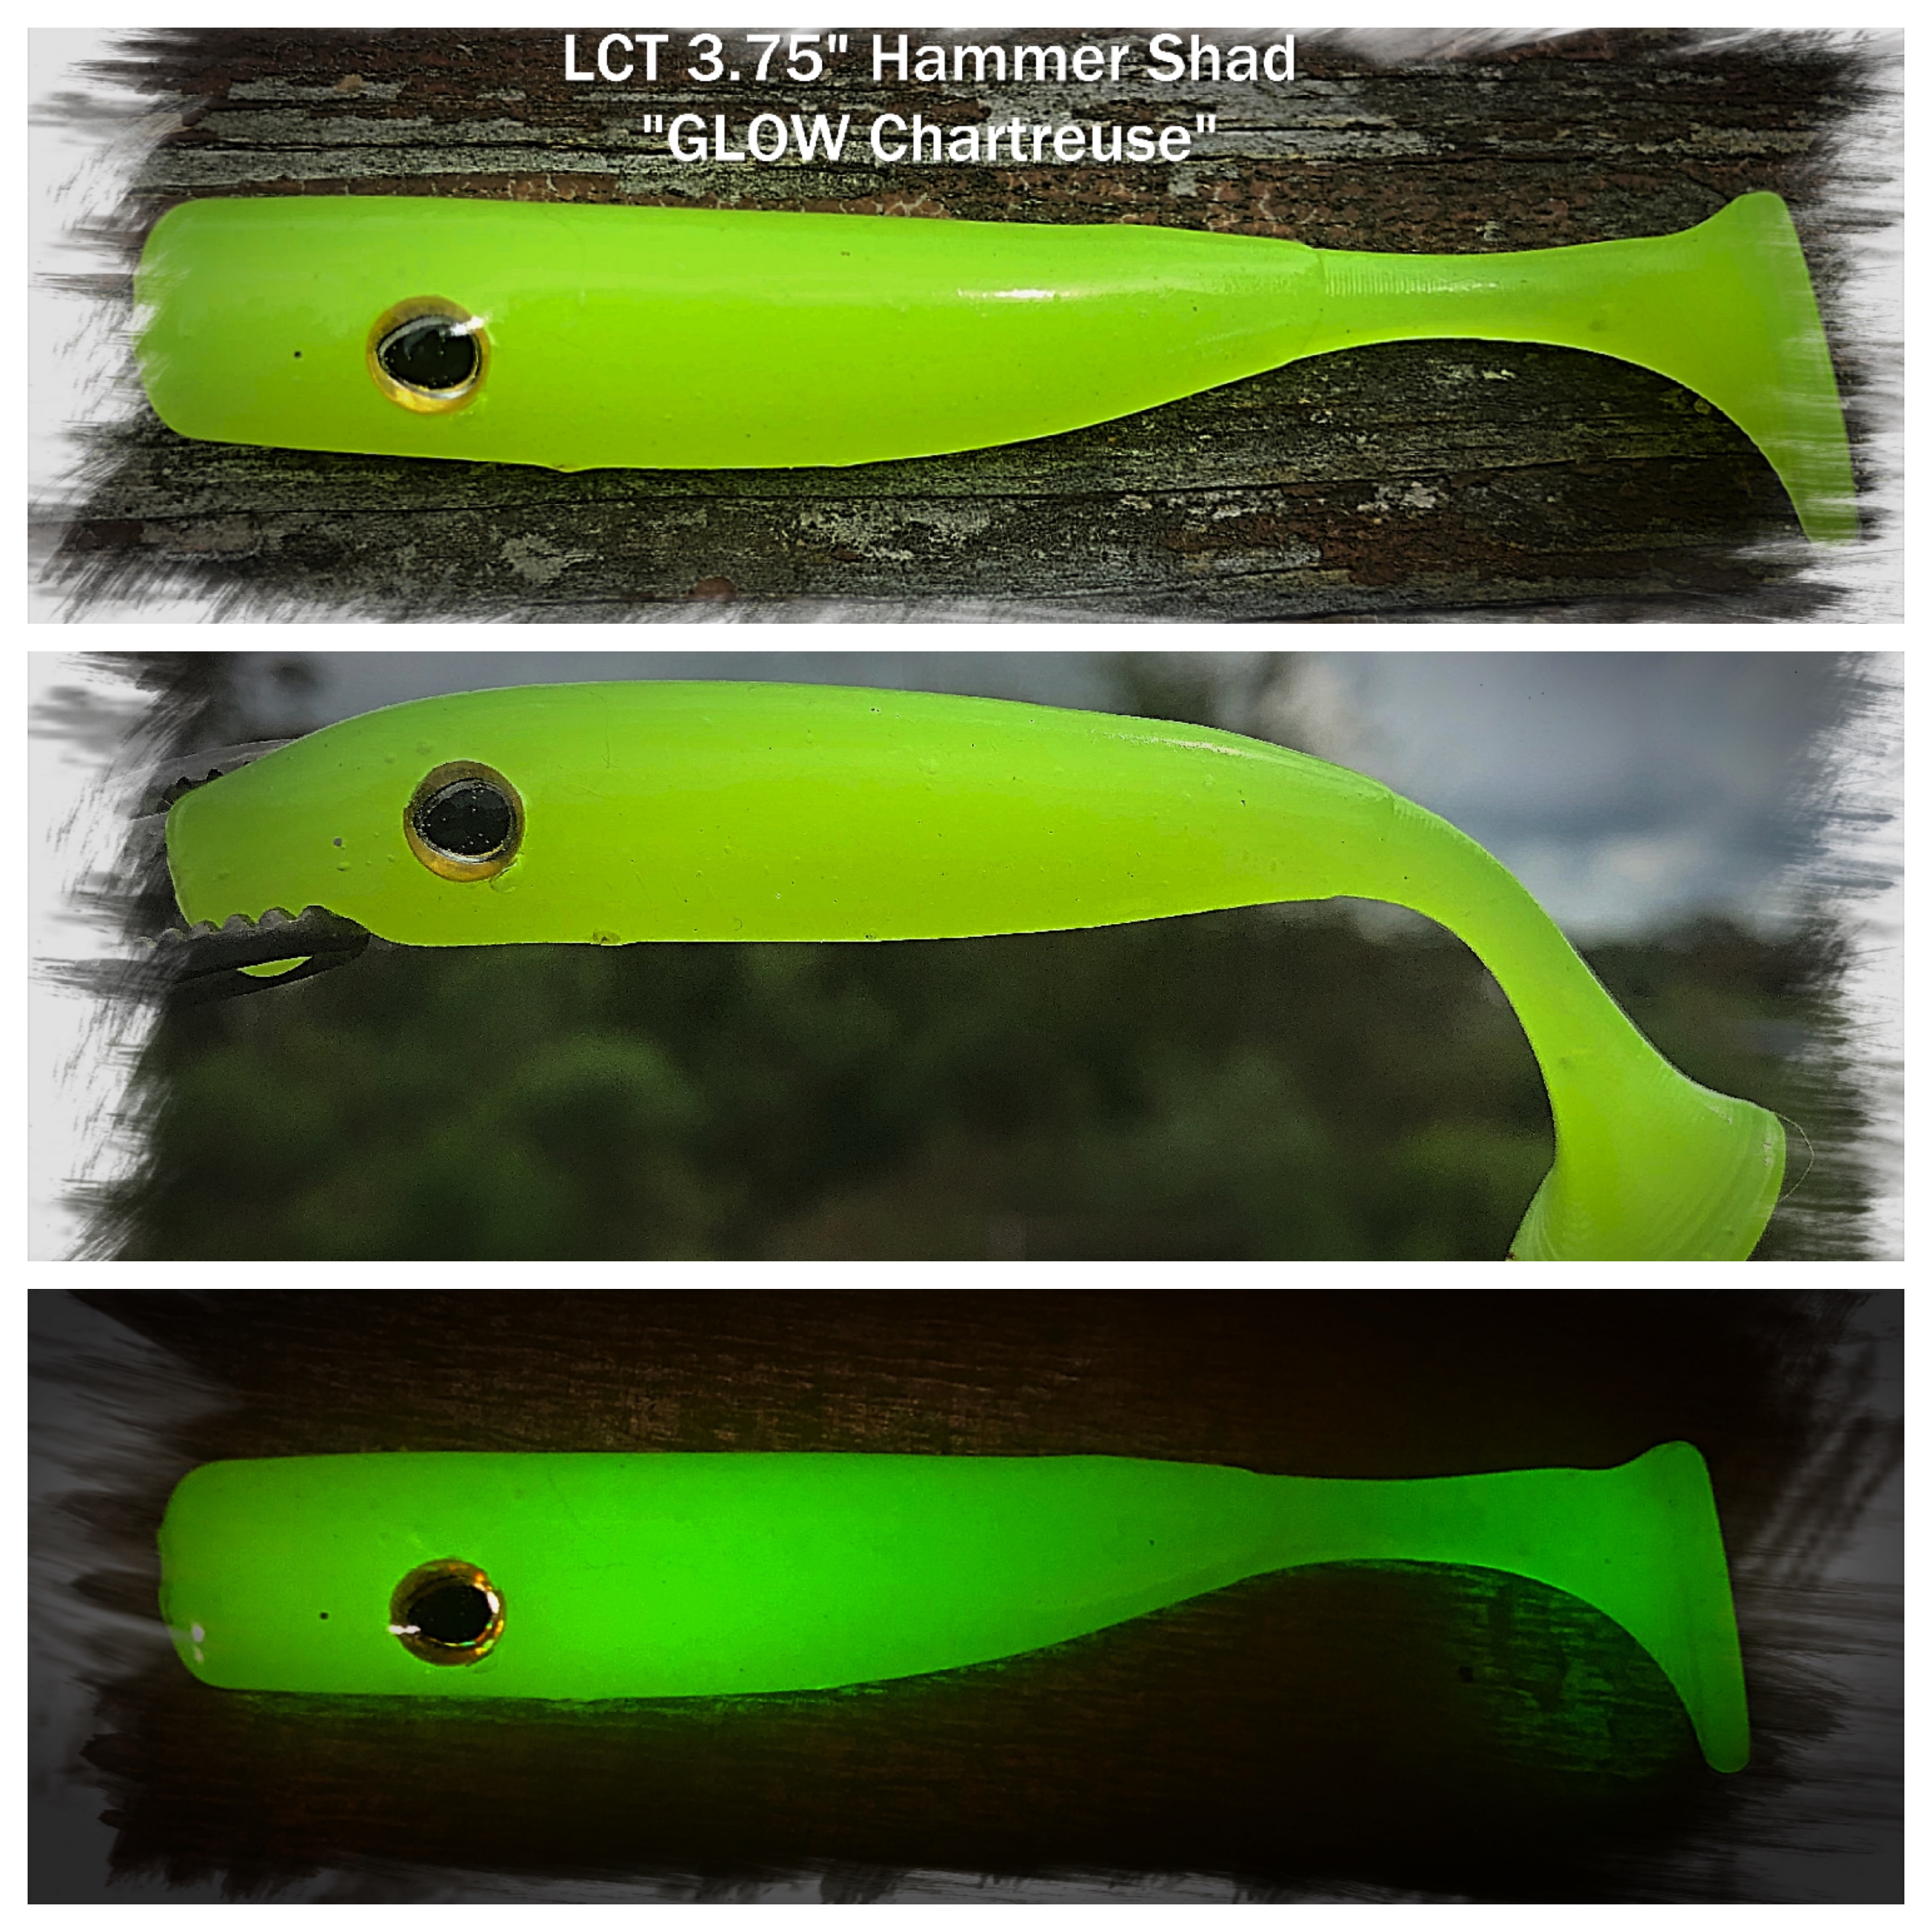 LCT 3.75 Hammer Shad (5 Pack) GLOW Chartreuse